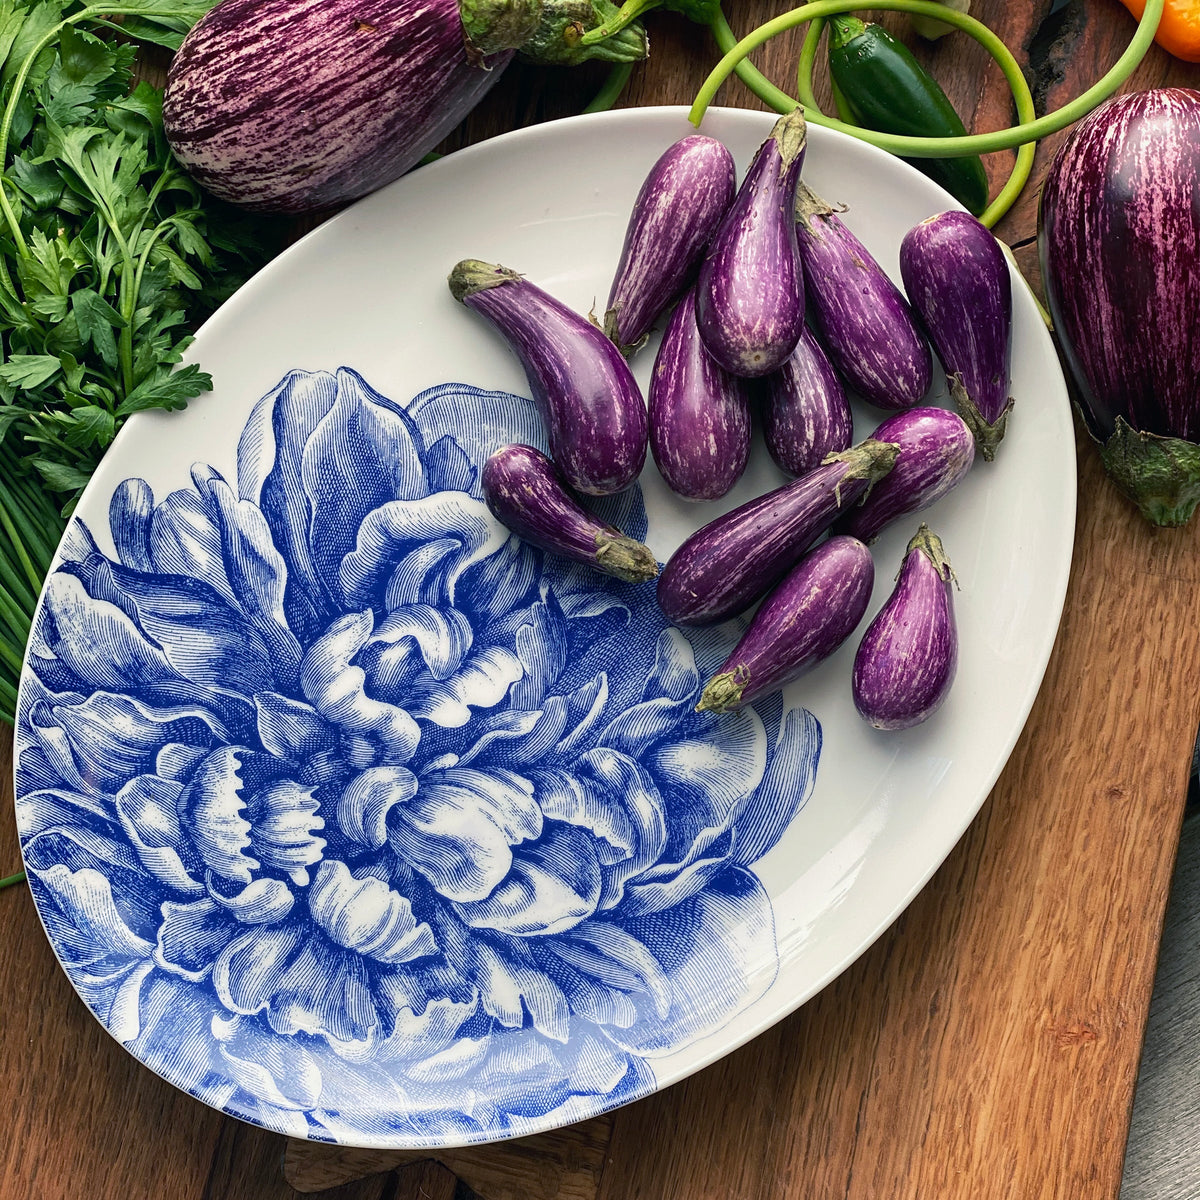 A decorative Peony Medium Coupe Oval Platter plate holding small purple eggplants, surrounded by various vegetables on a wooden surface.